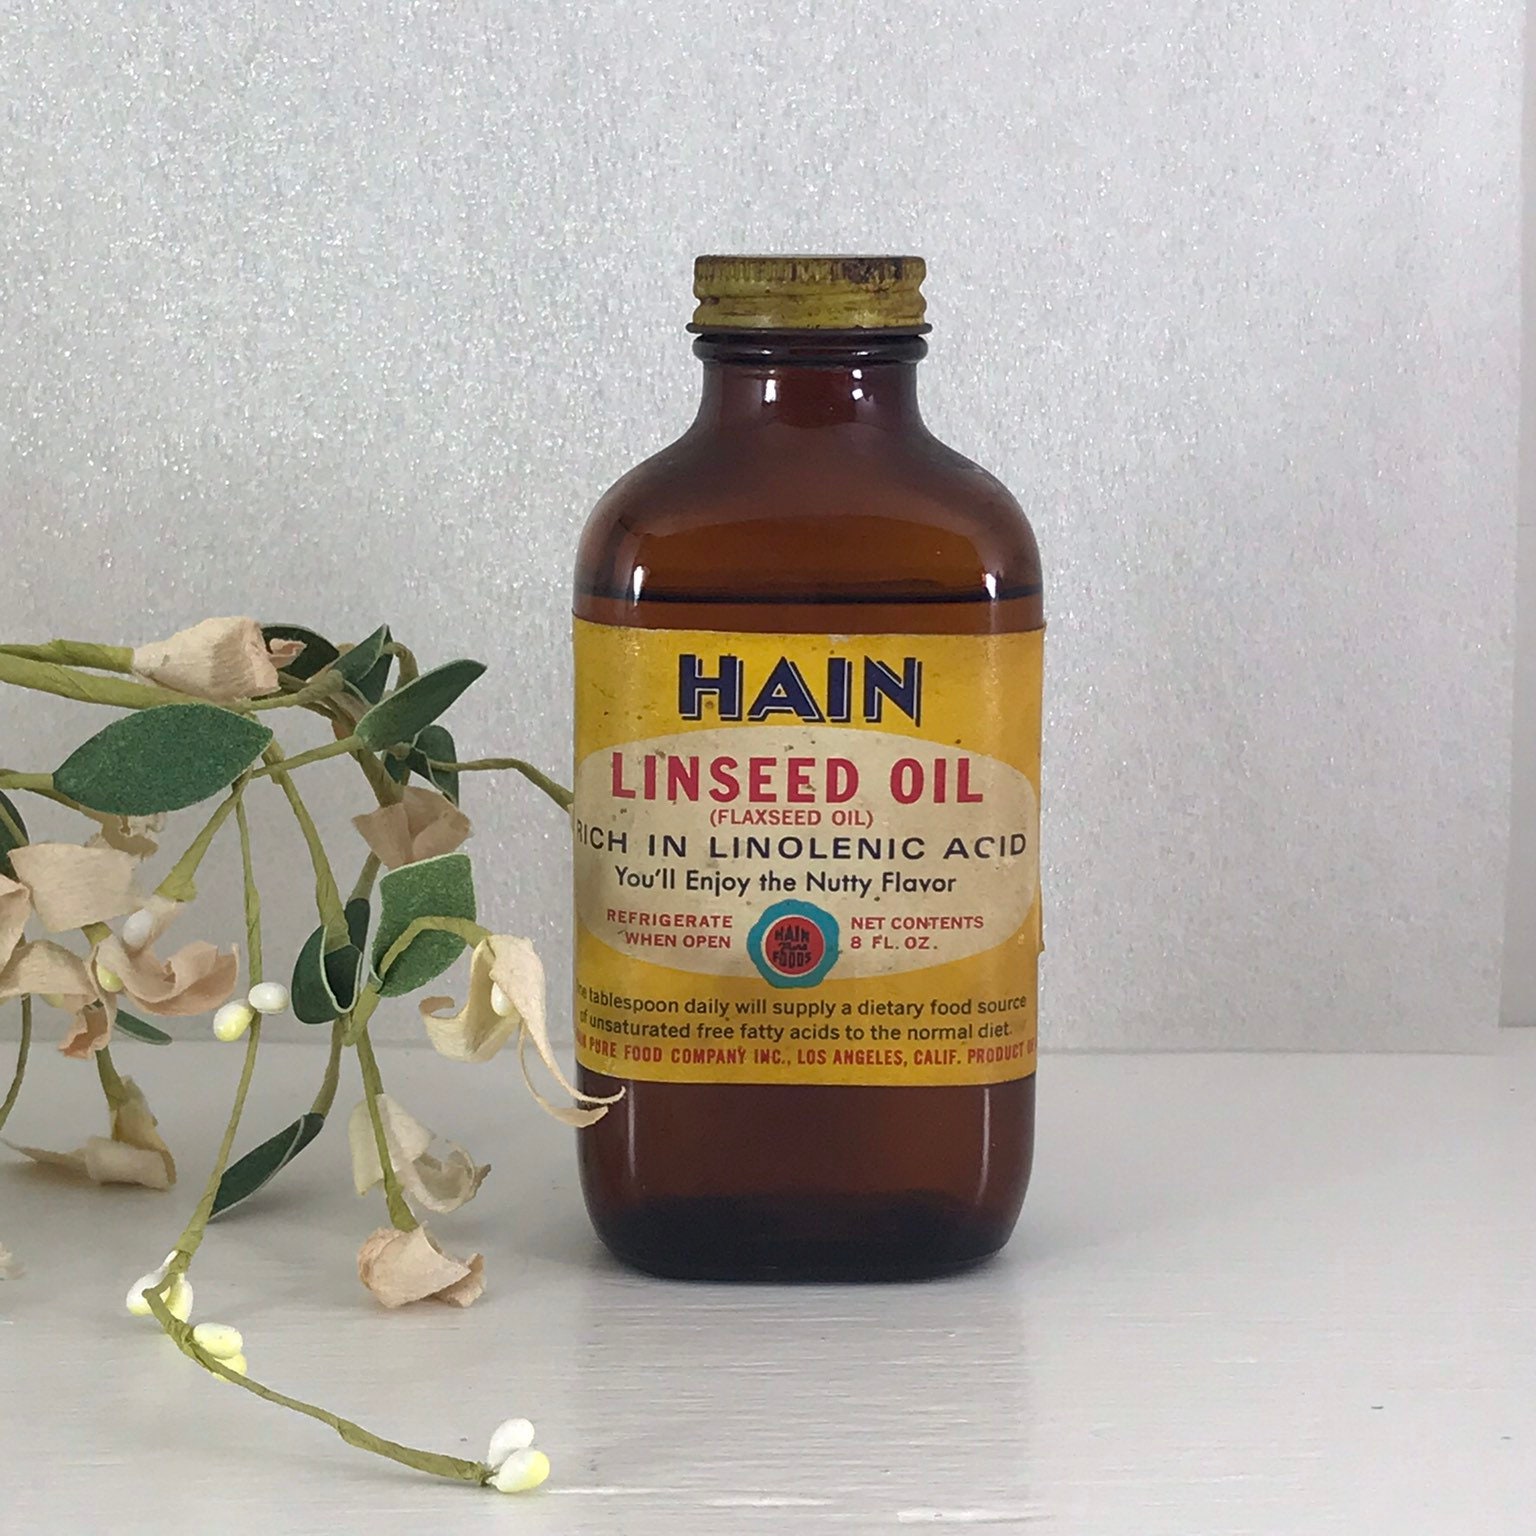 Bottle Hain Linseed Oil (Flaxseed Oil) Rich in Linolenic Acid Vintage  Antique Food Grade Dist. By Hain Pure Food Company Inc., Los Angeles